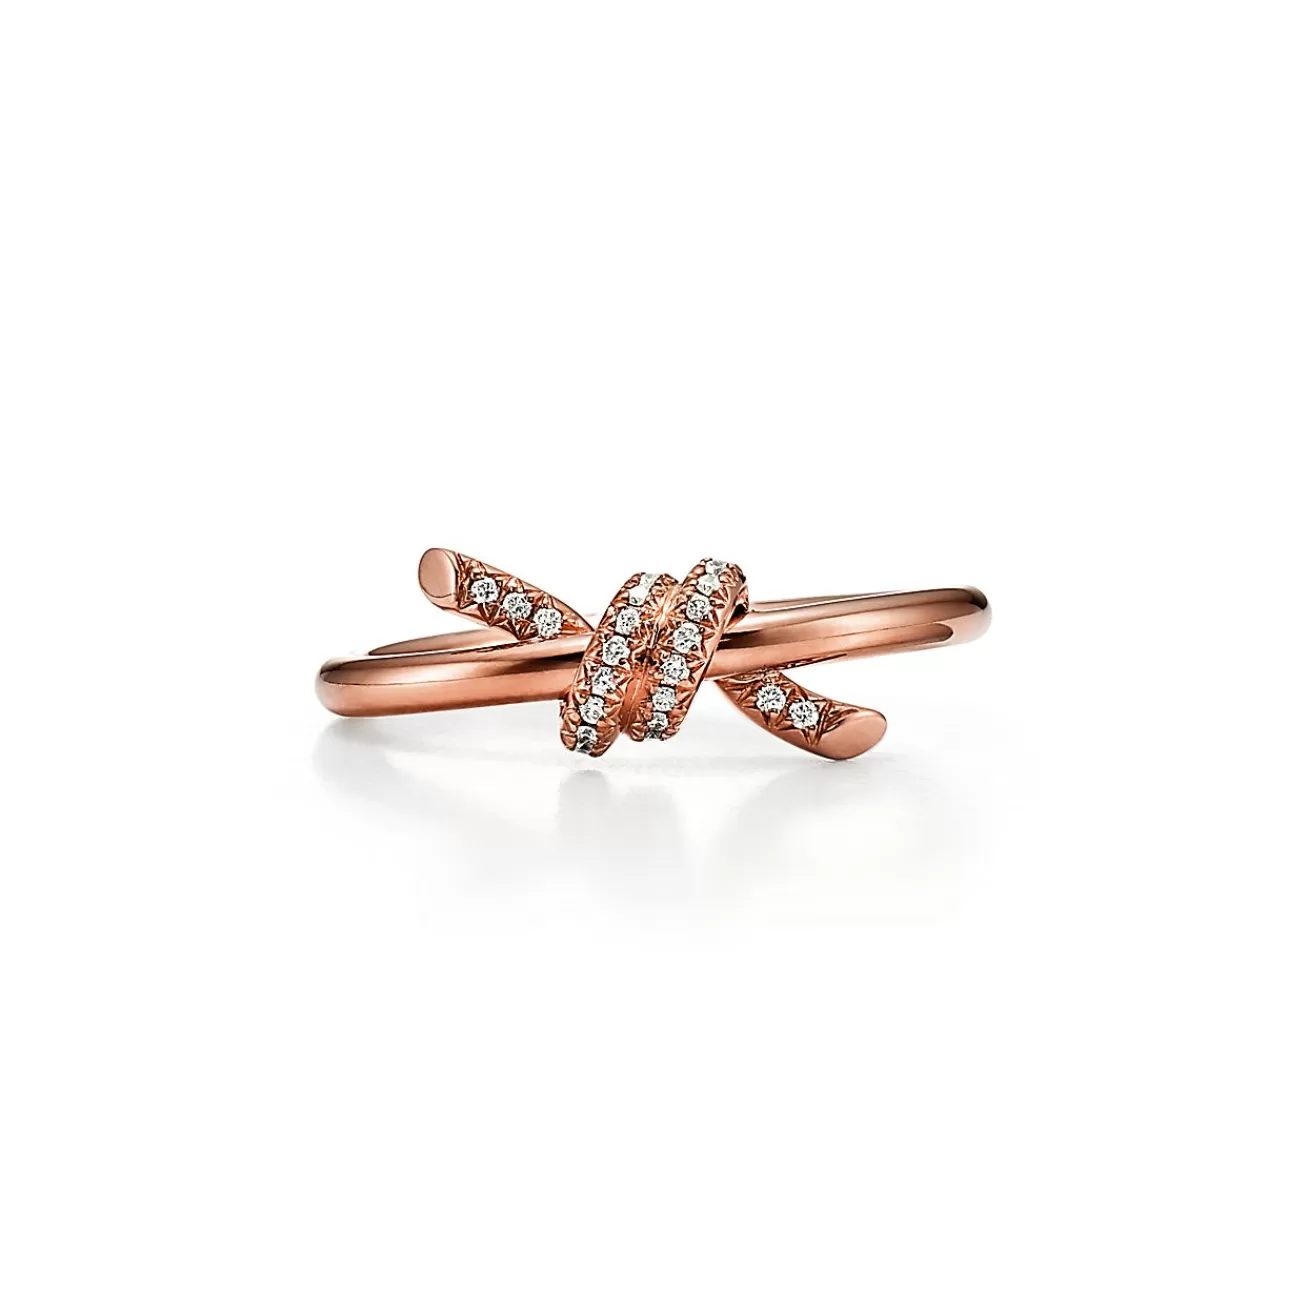 Tiffany & Co. Tiffany Knot Ring in Rose Gold with Diamonds | ^ Rings | Rose Gold Jewelry